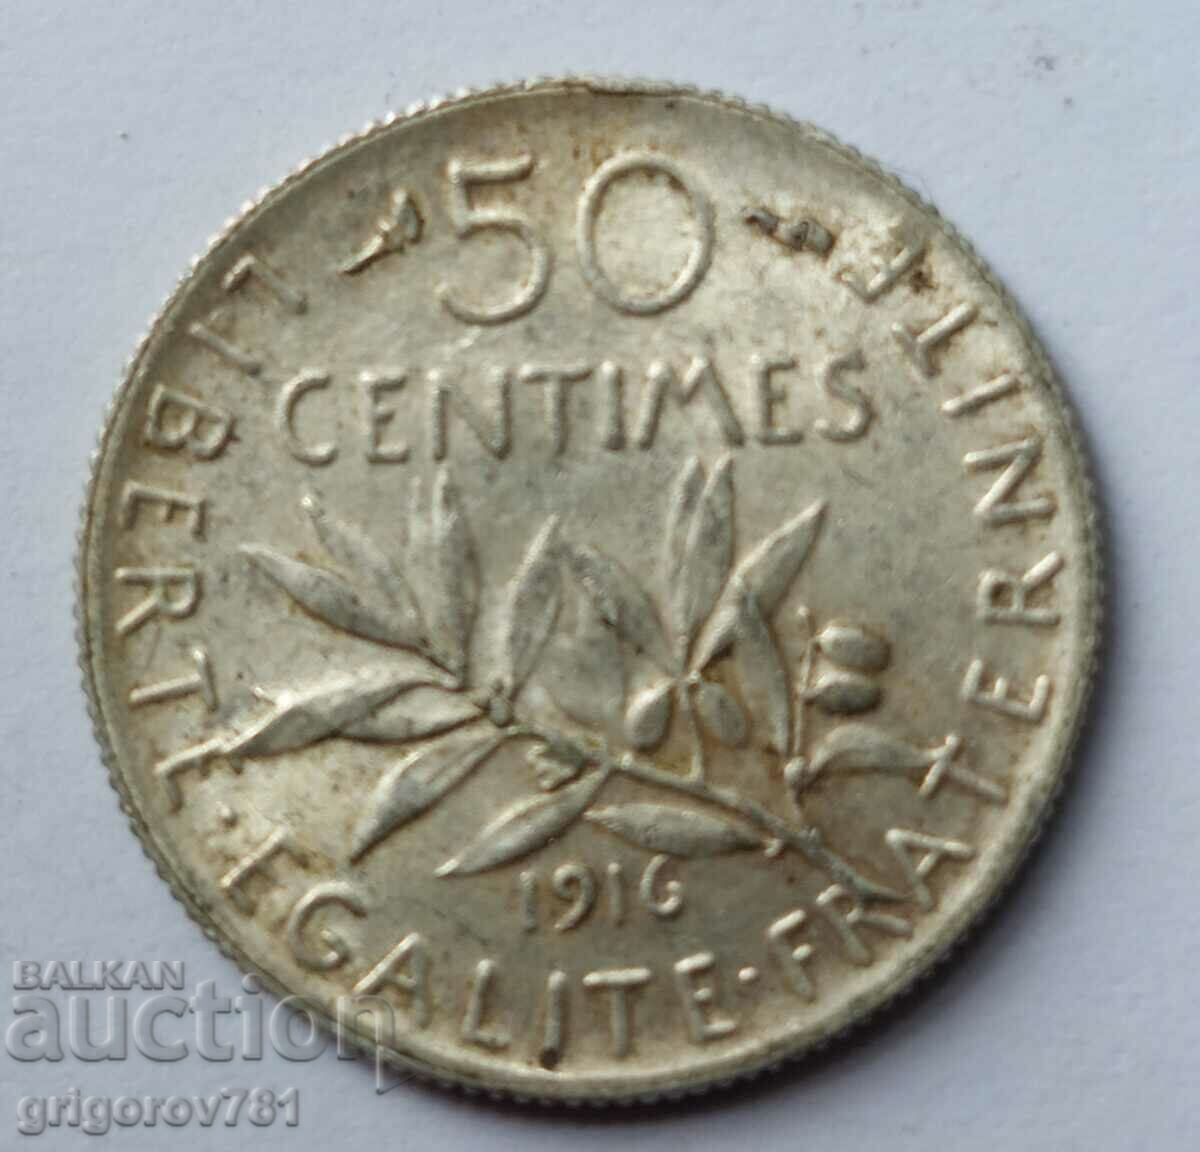 50 centimes silver France 1916 - silver coin №7